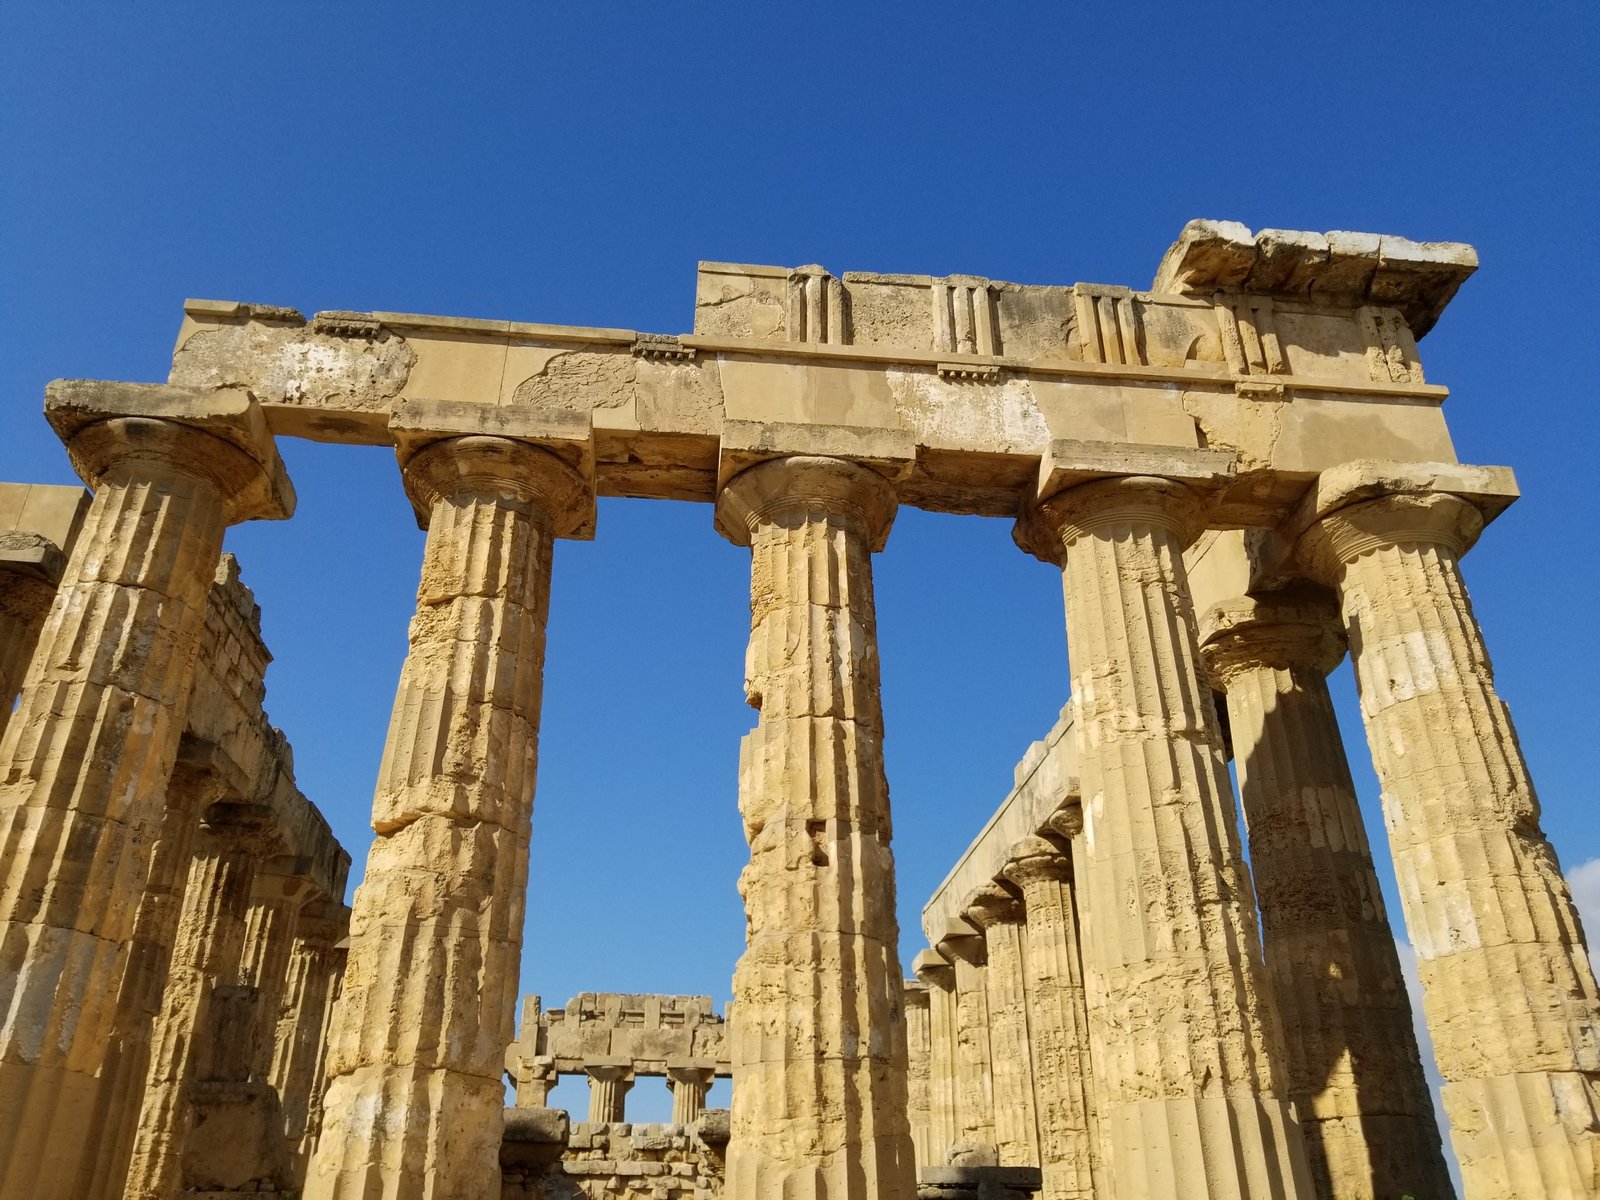 Selinunte Archaeological Park in Sicily, a must see, ouritalianjourney.com, https://ouritalianjourney.com/selinunte-archaeological-park-Sicily